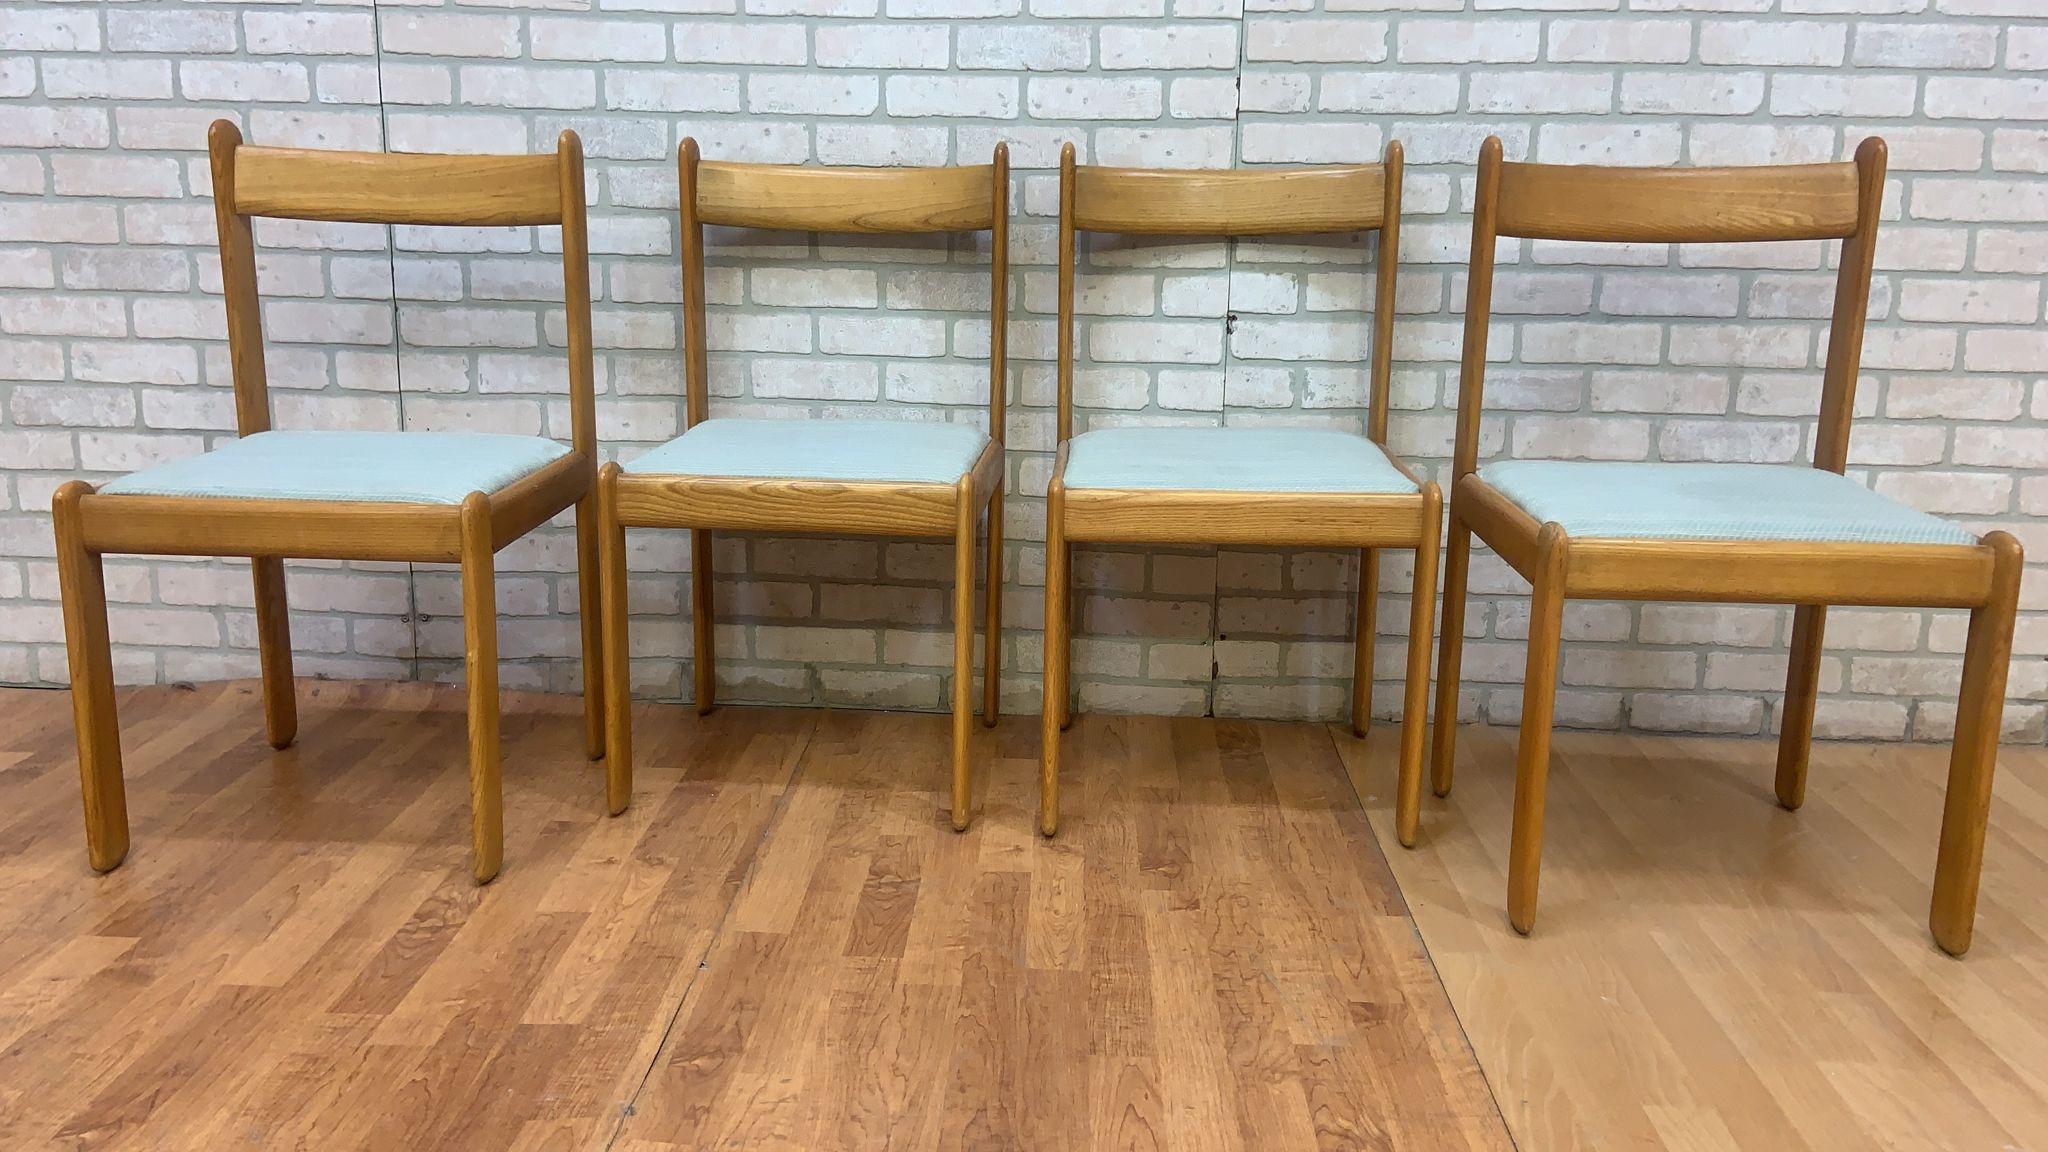 Vintage Italian Modern Vico Magistretti Style Blonde Beech Wood Chairs -Set of 4 For Sale 5